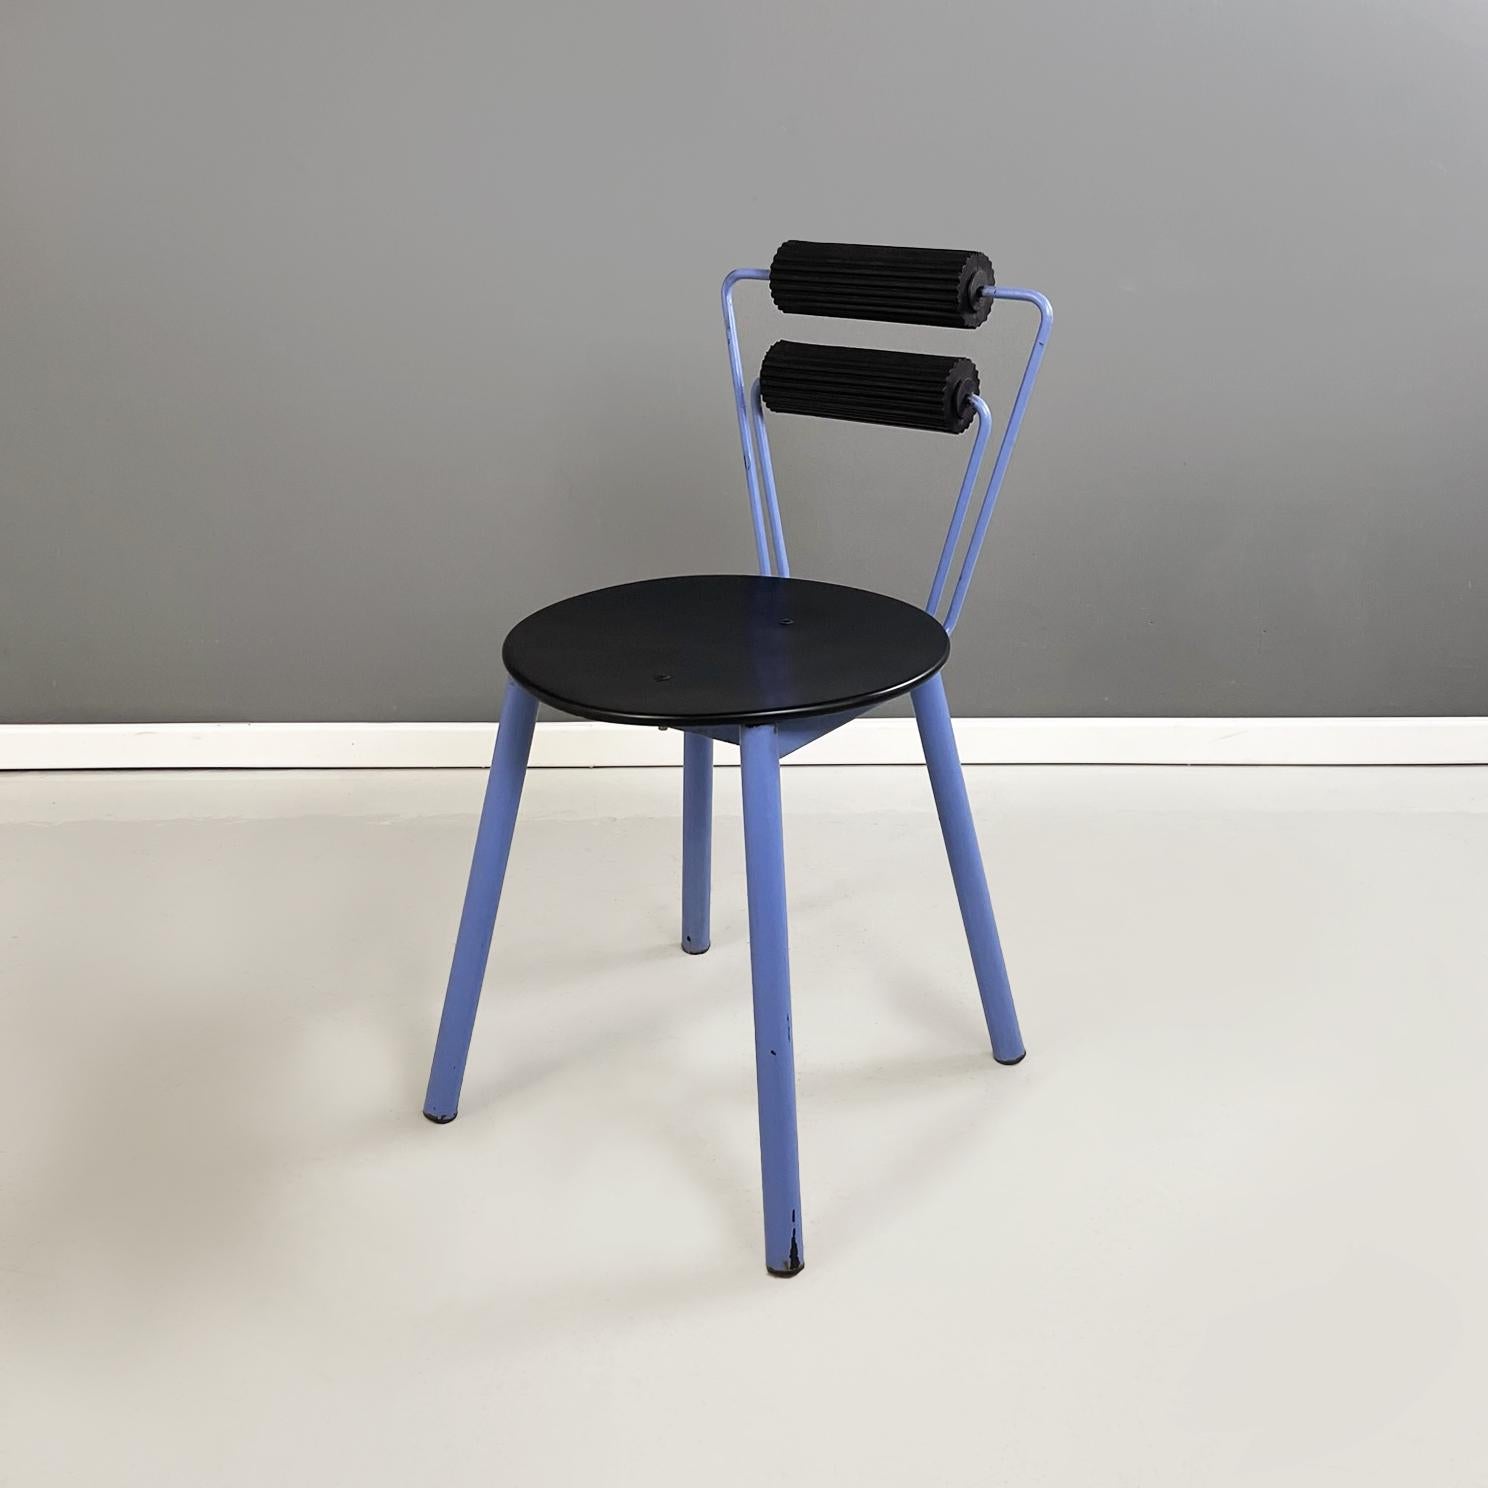 Italian modern Chairs in blue metal, black wood and black rubber, 1980s
Pair of fantastic and vintage chairs with round seat in black painted wood. The backrest is made up of a pair of blue painted metal rods and a pair of black rubber cylinders,